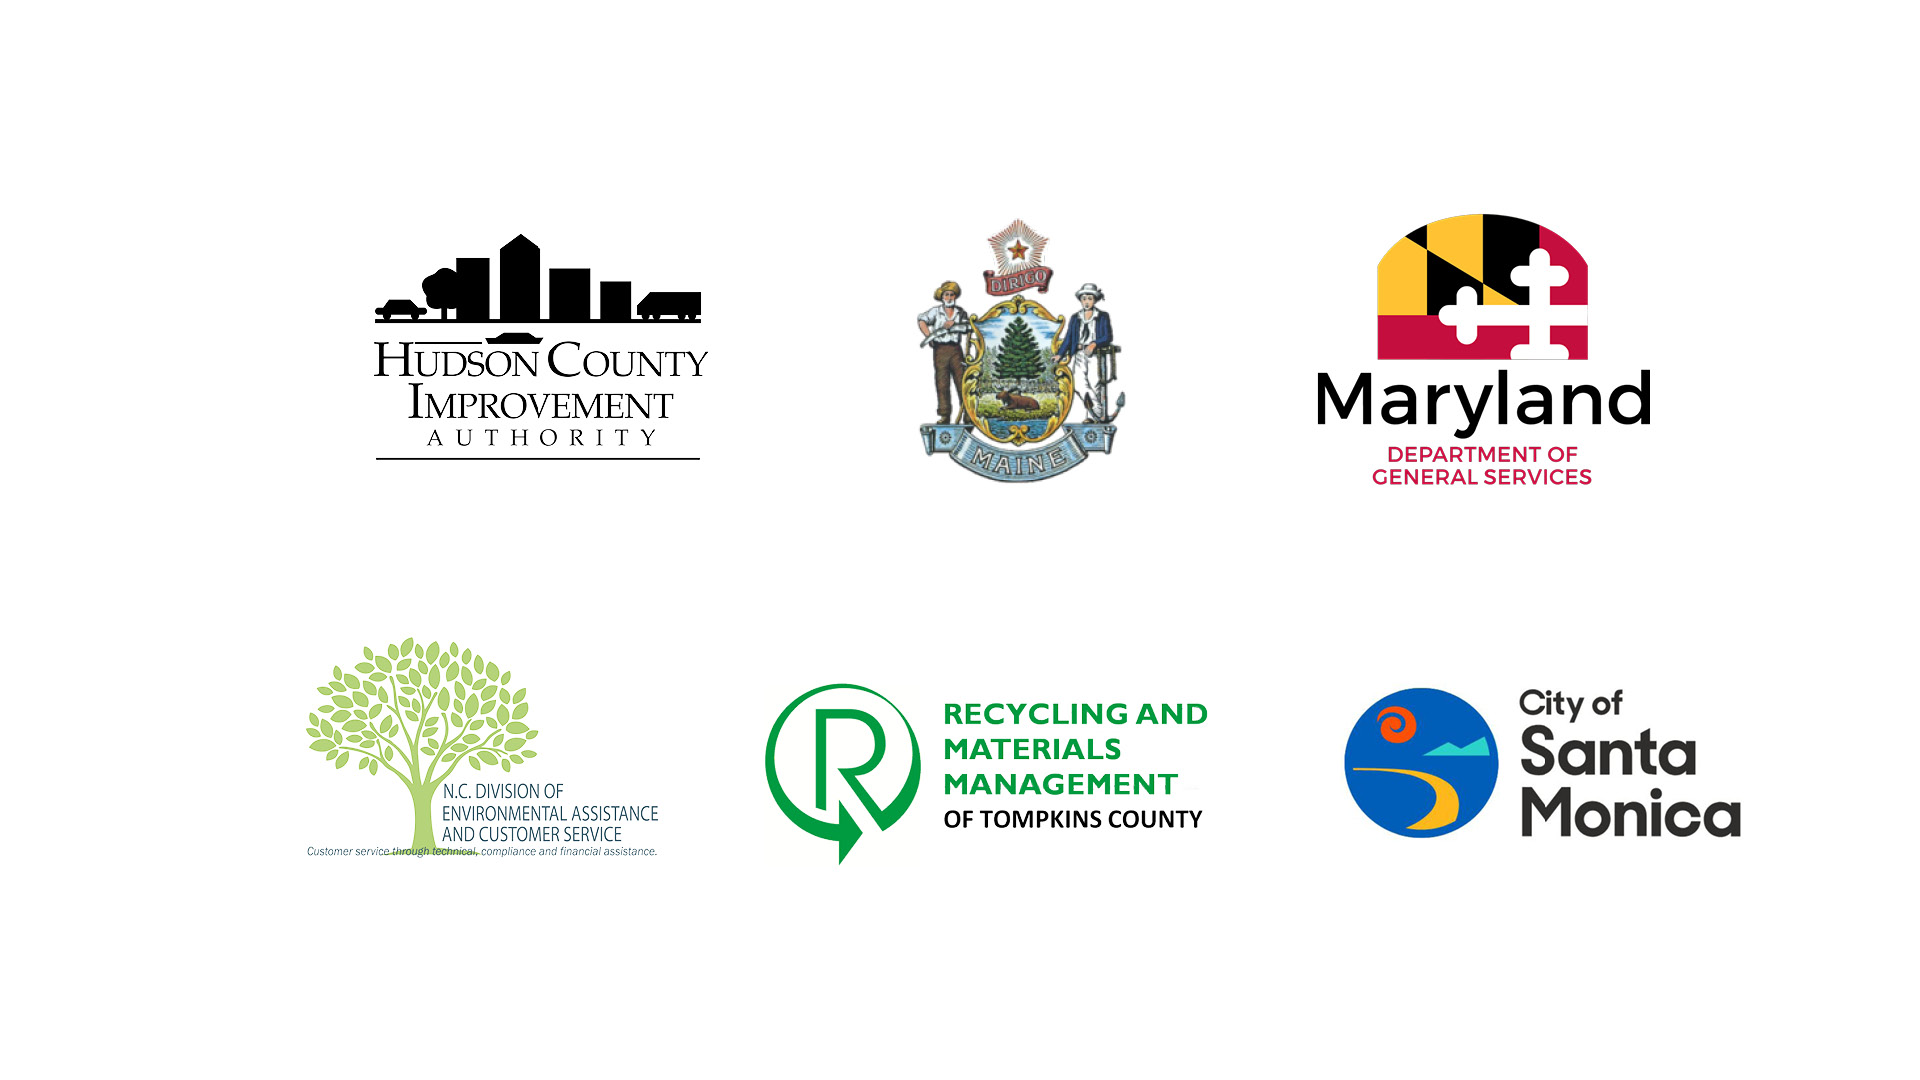 The current NERC-APR Government Recycling Demand Champions' logos